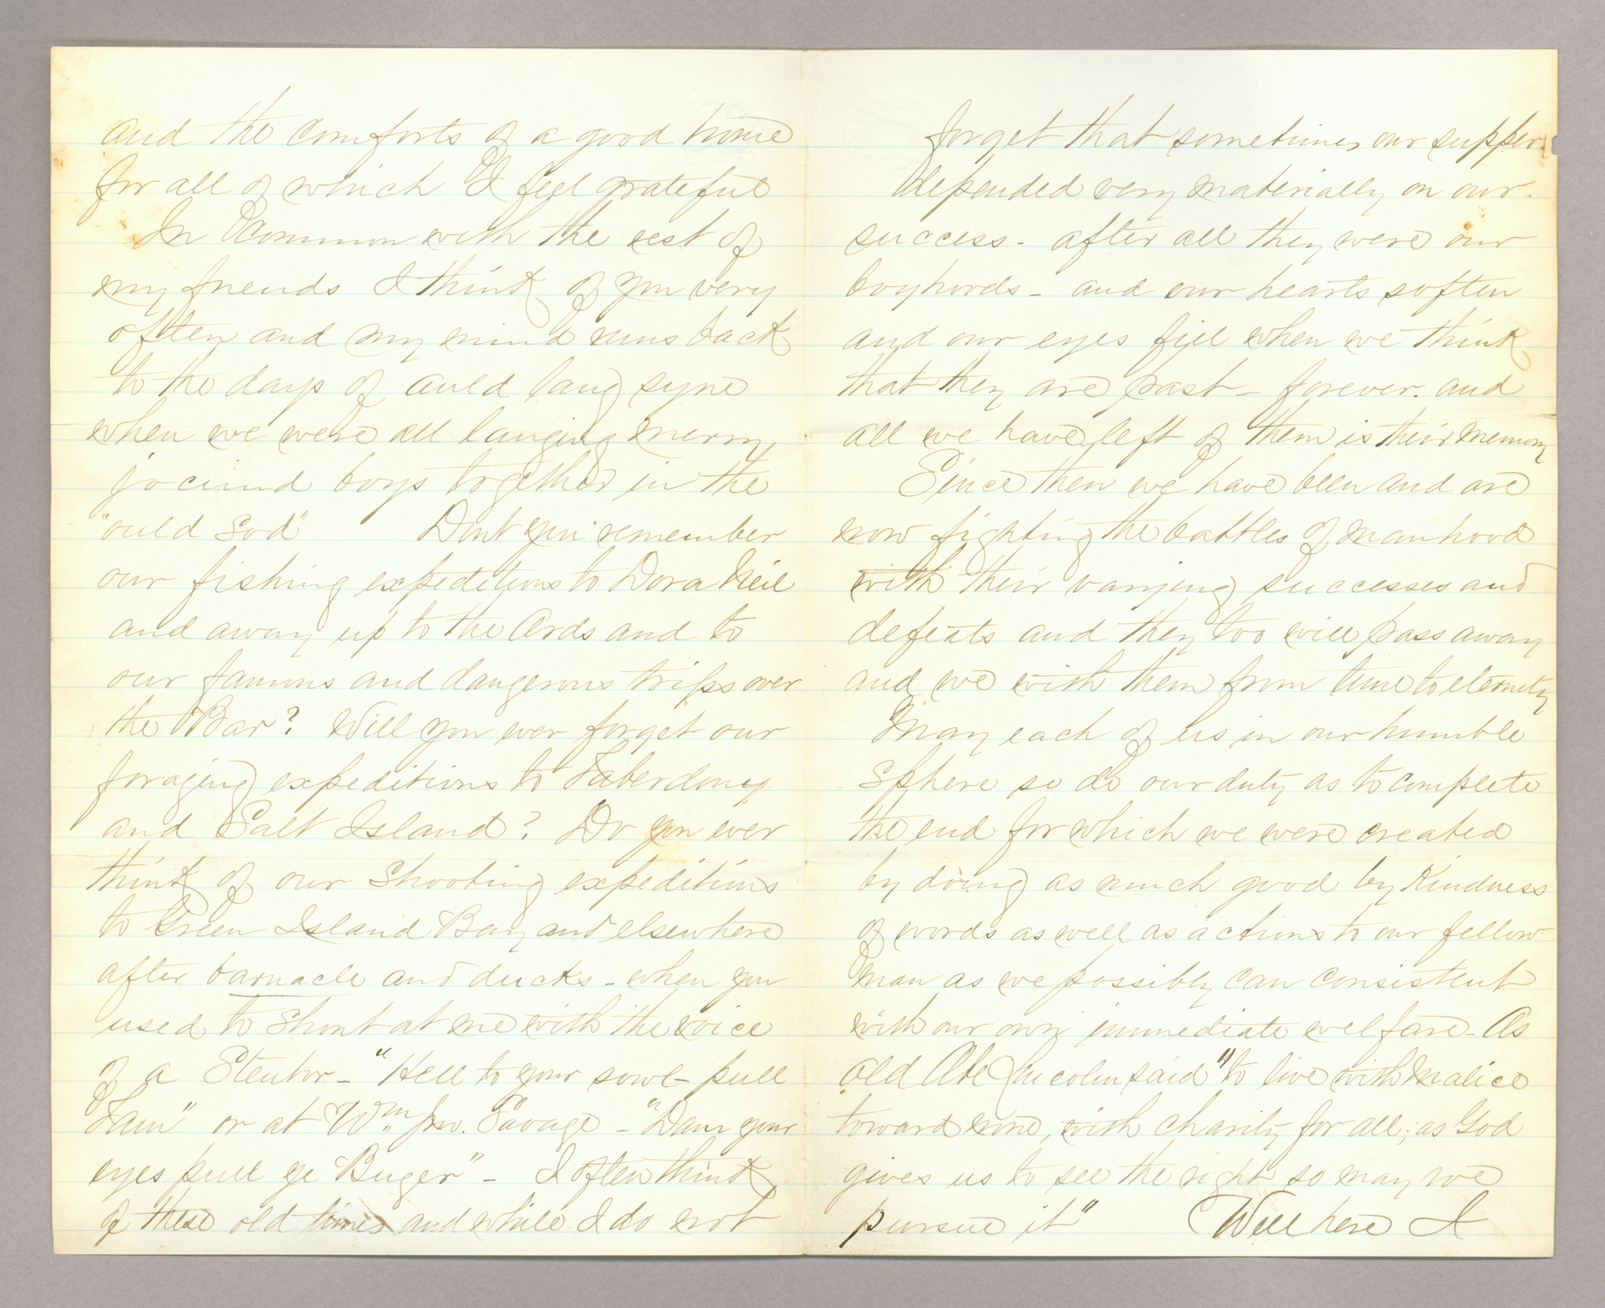 Letter. "Tom" [Thomas Lowry Young], Cincinnati, Ohio, to "Jno [E.] Brownlee Esqr", Grace Hill, Potter County, Pennsylvania, Pages 2-3